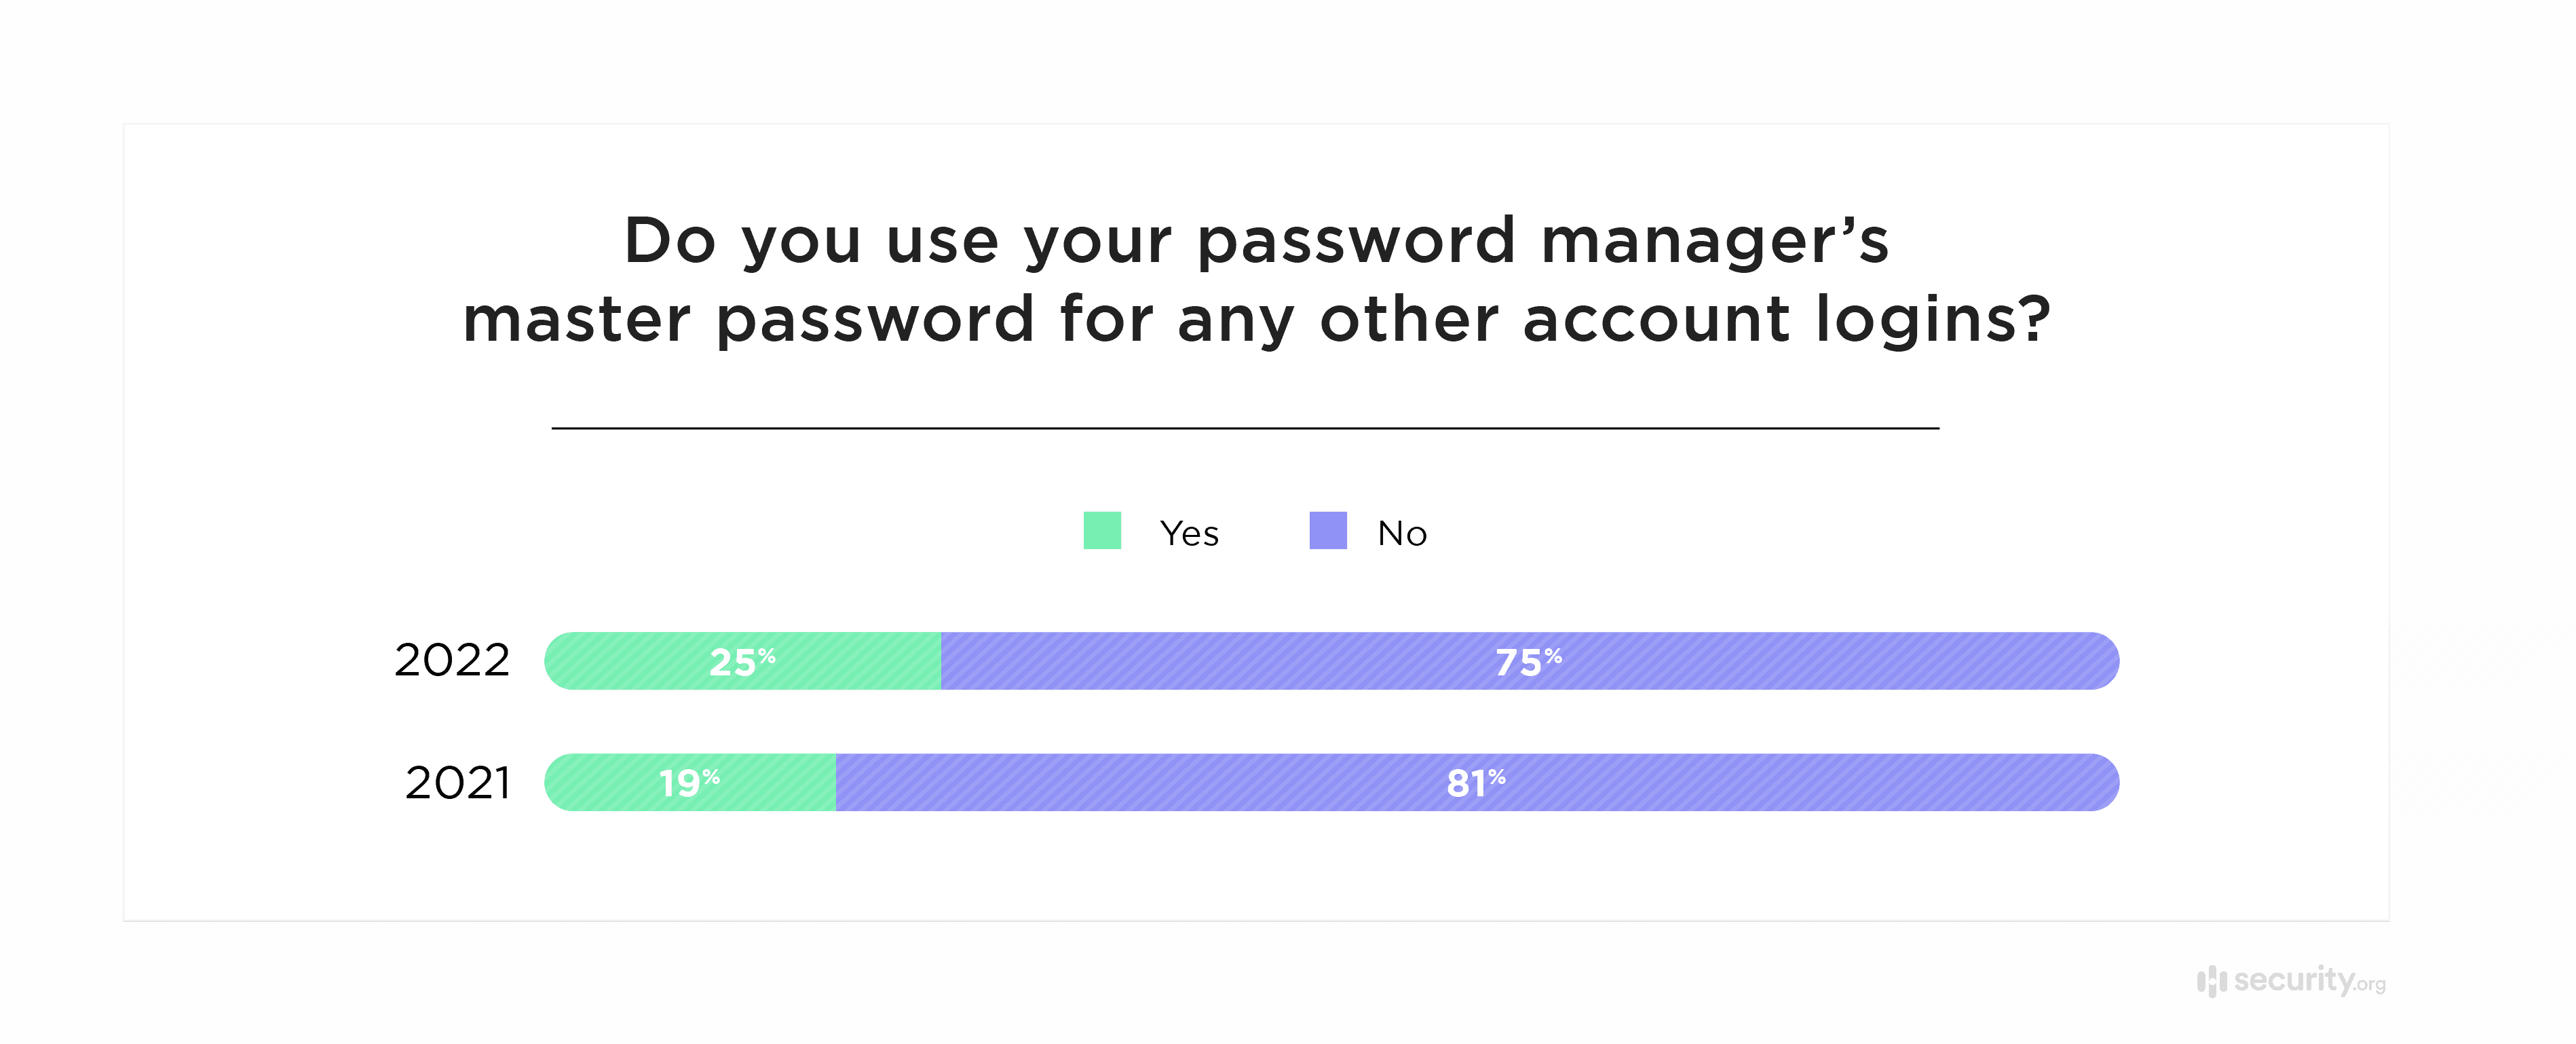 Do you use your password managers master password for any other account logins